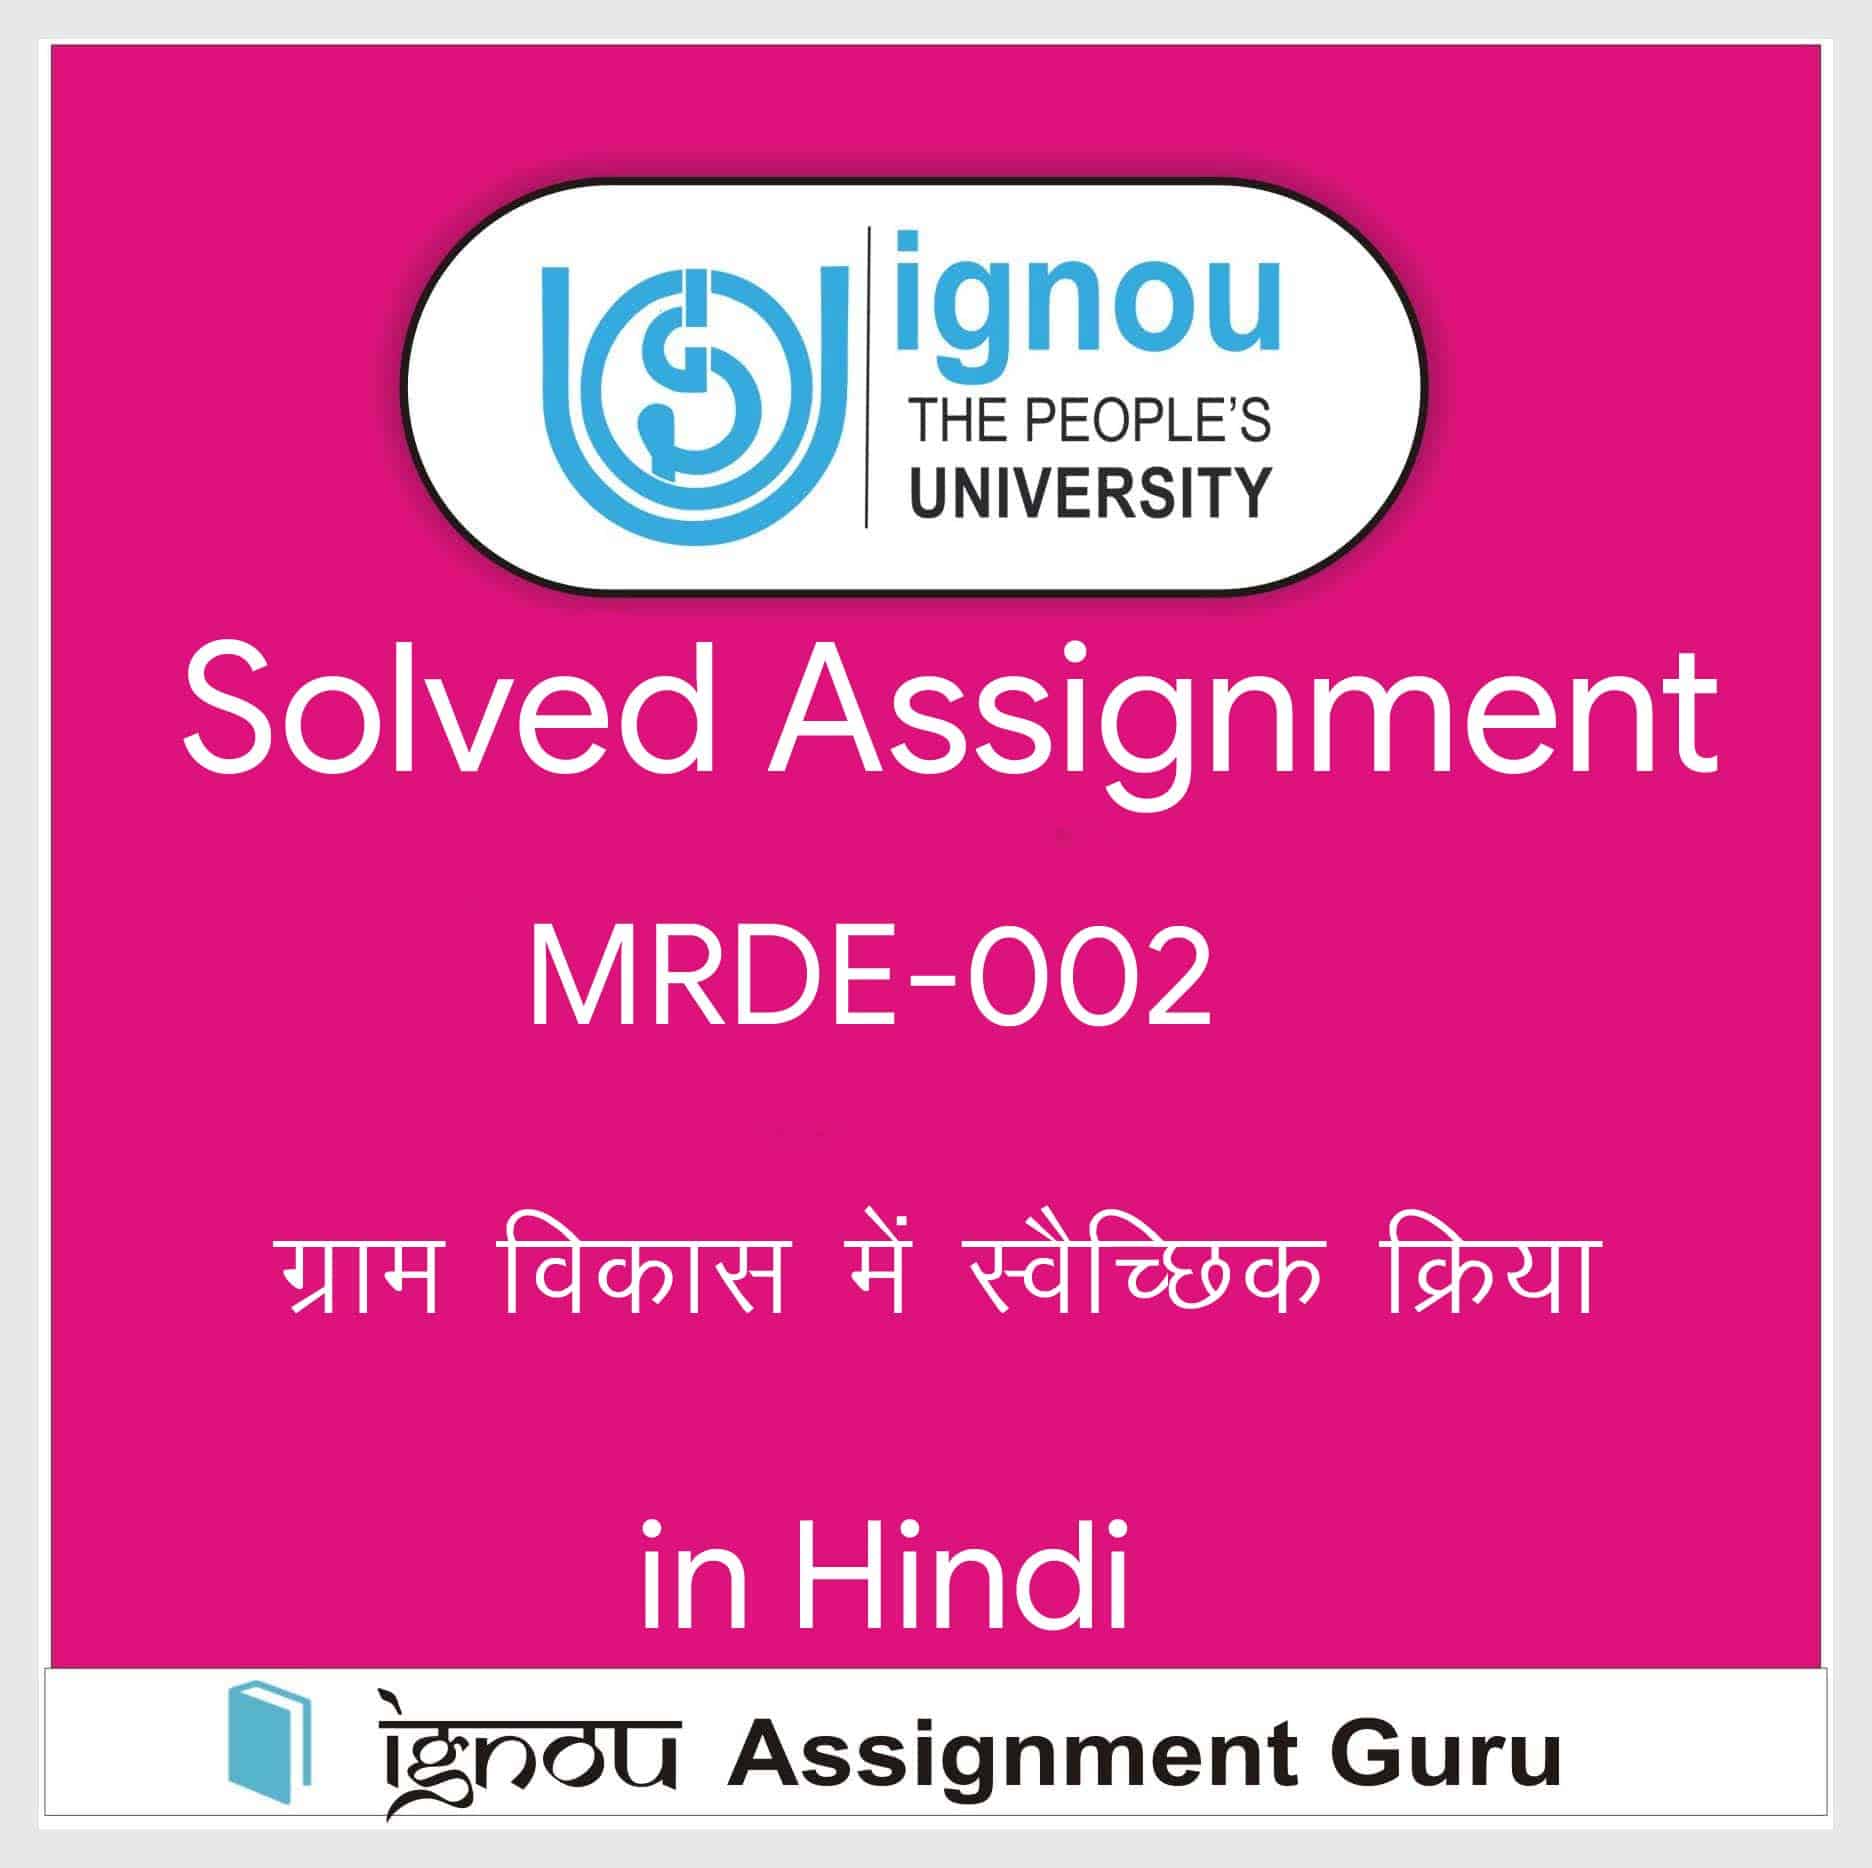 ignou assignment begs 183